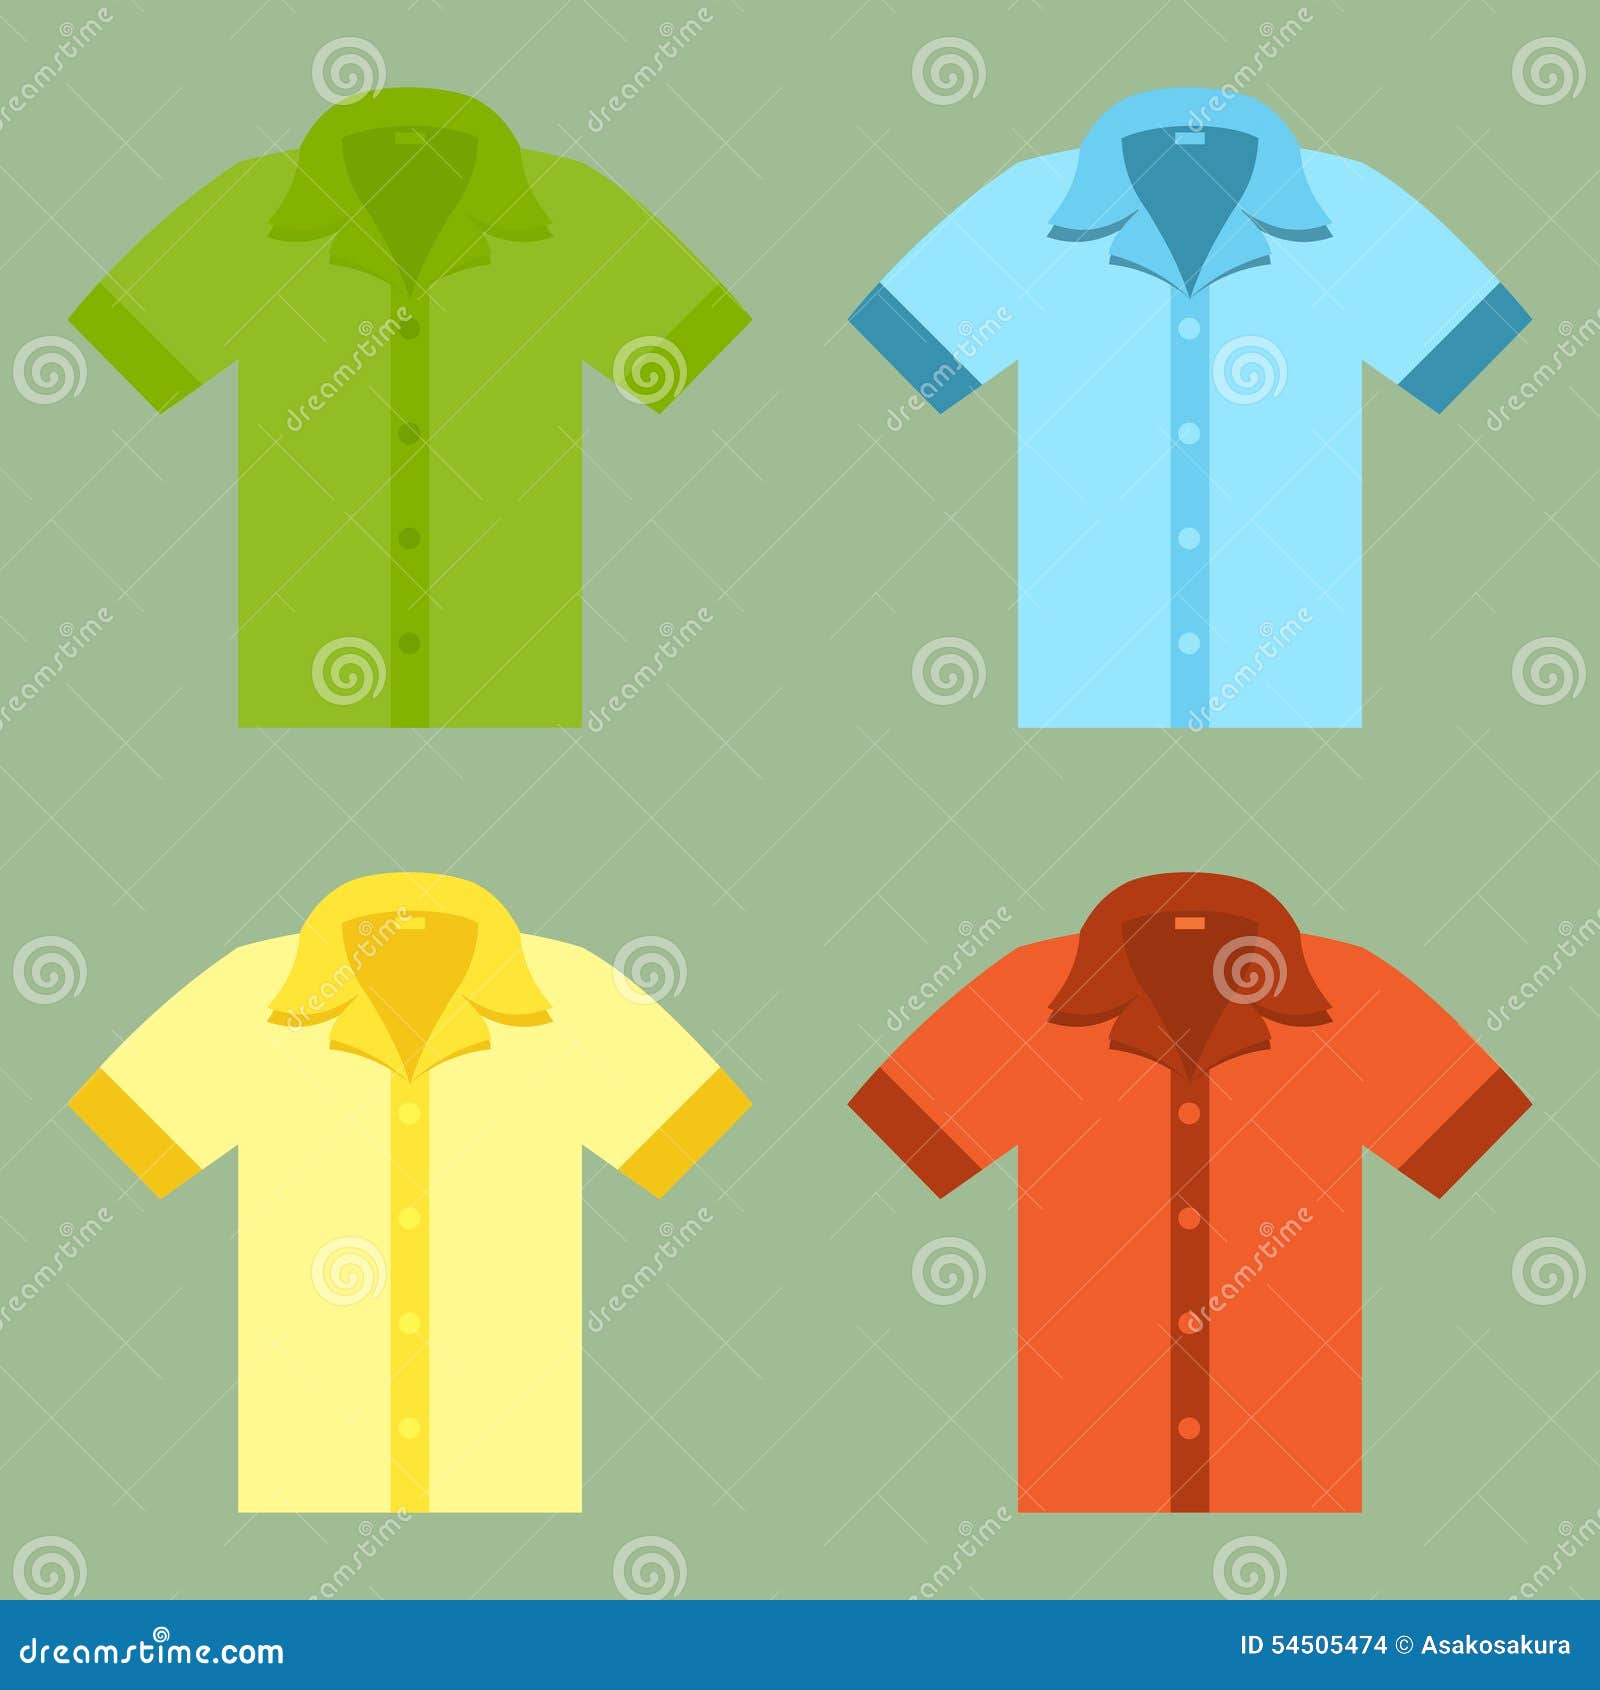 Shirts for Your Design in Flat Style. Stock Vector - Illustration of ...